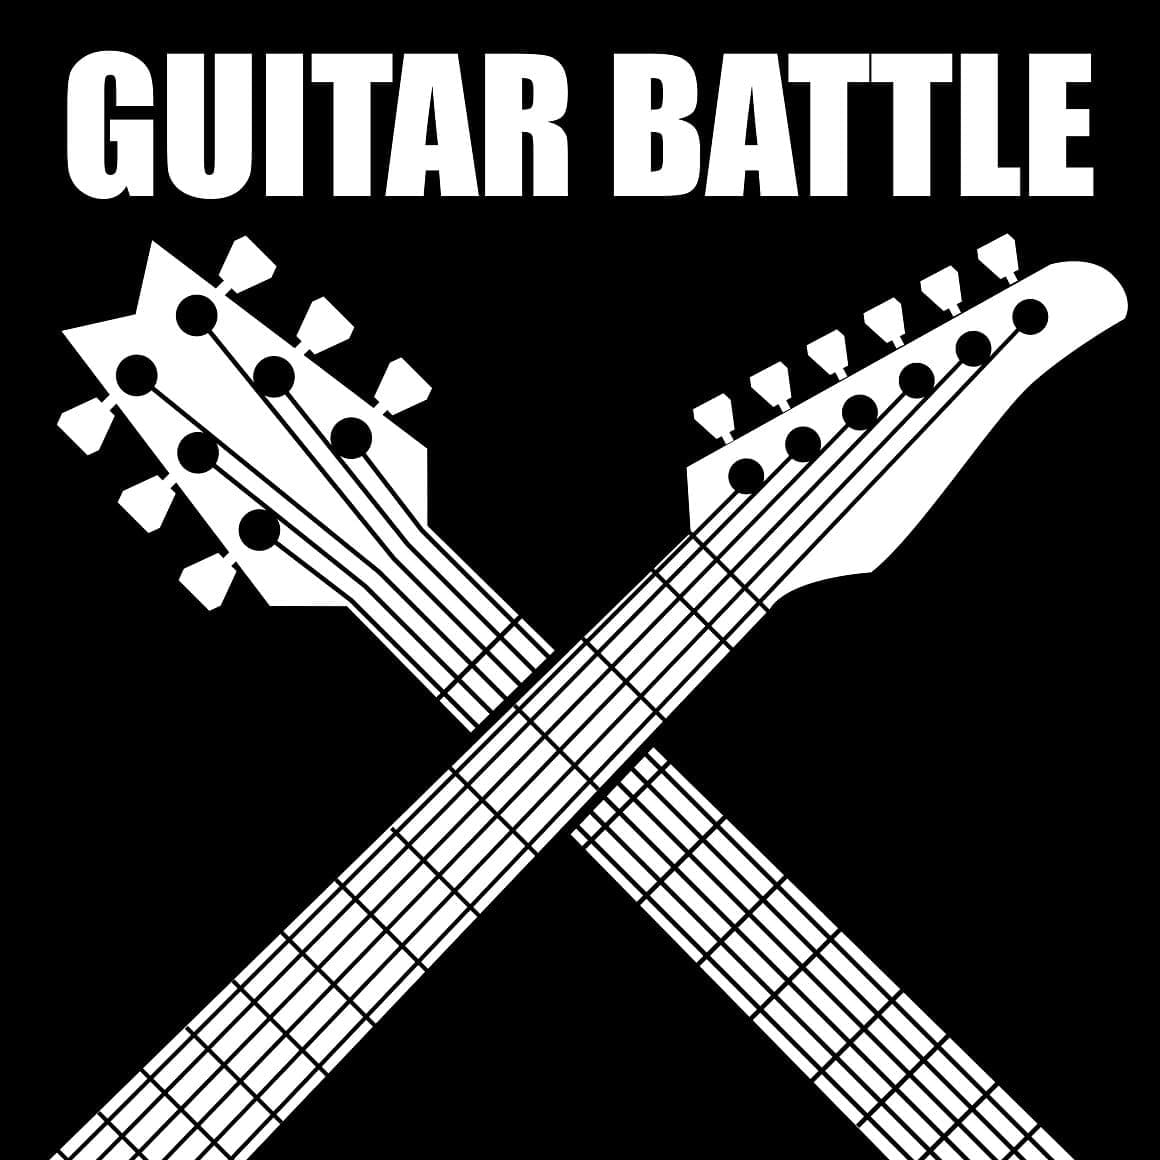 Battle of acoustic and electric guitars on a black background.